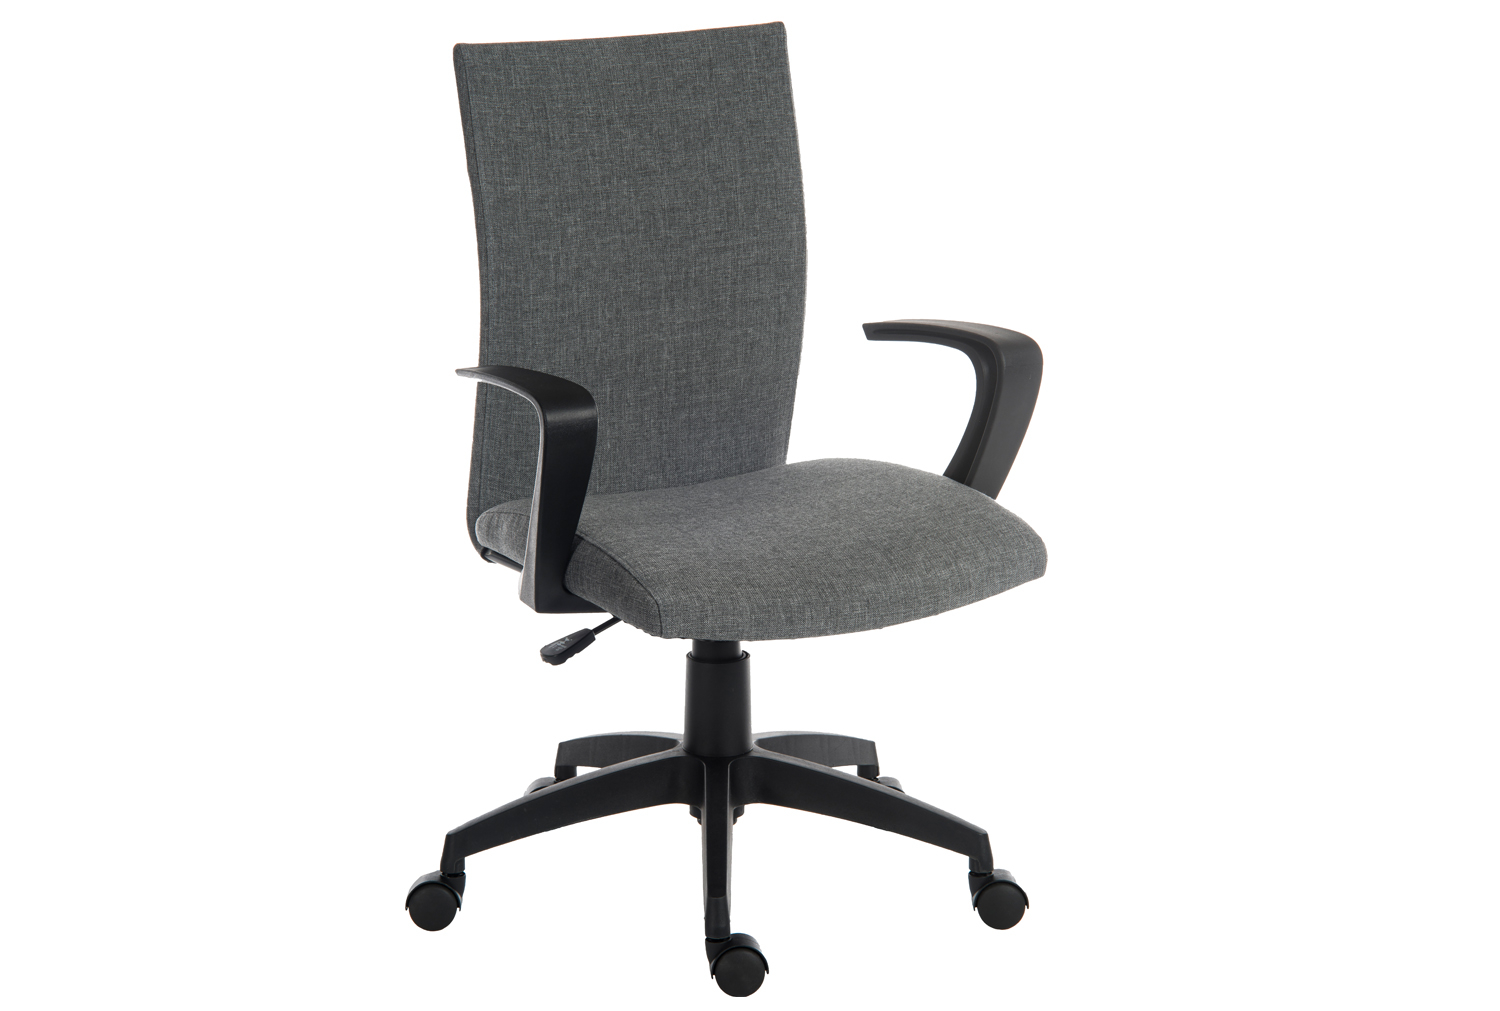 Employ Fabric Executive Office Chair Grey, Fully Installed